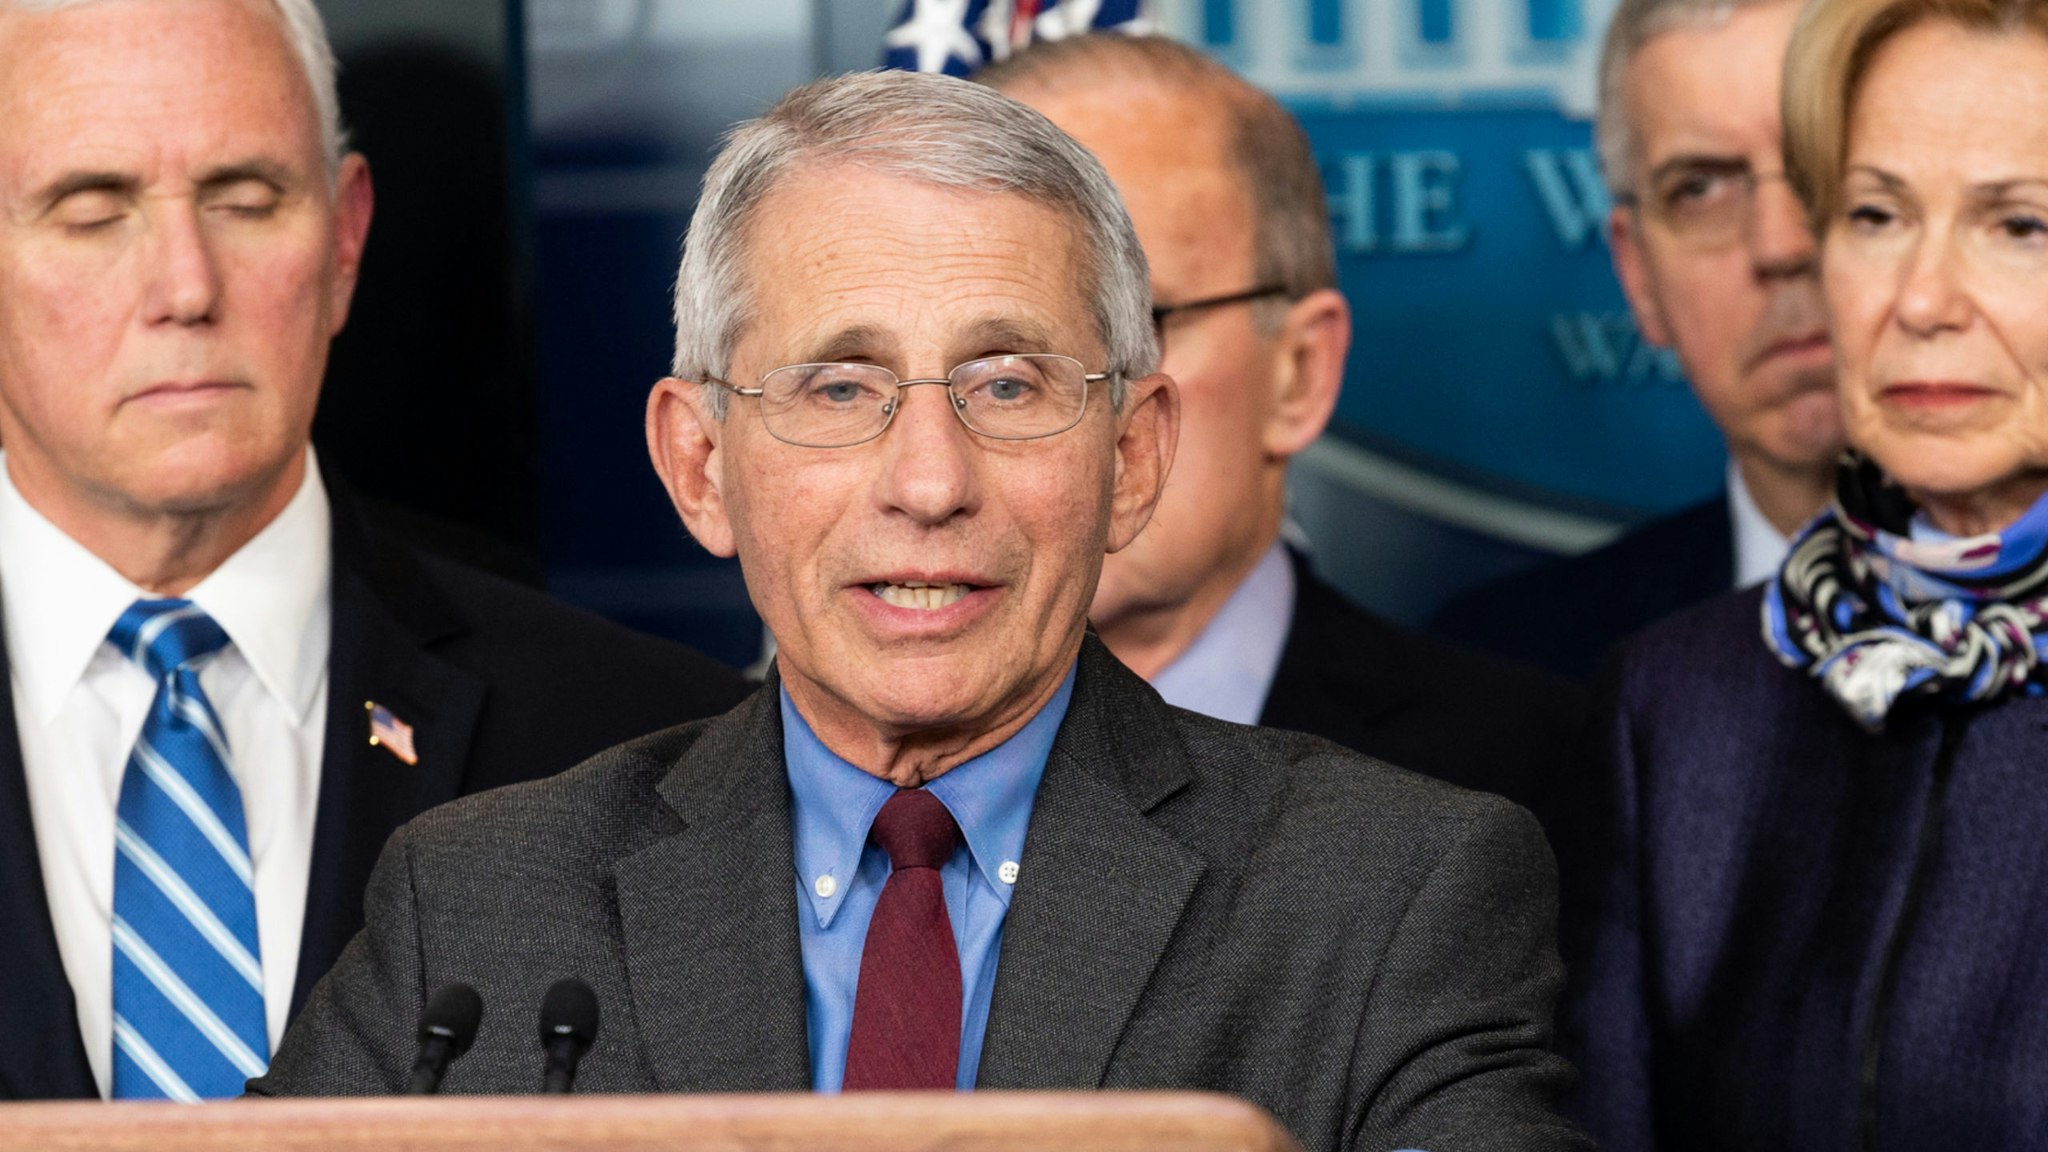 Dr. Anthony Fauci, Director of the National Institute of Allergy and Infectious Diseases, speaks at the Coronavirus Task Force Press Conference.